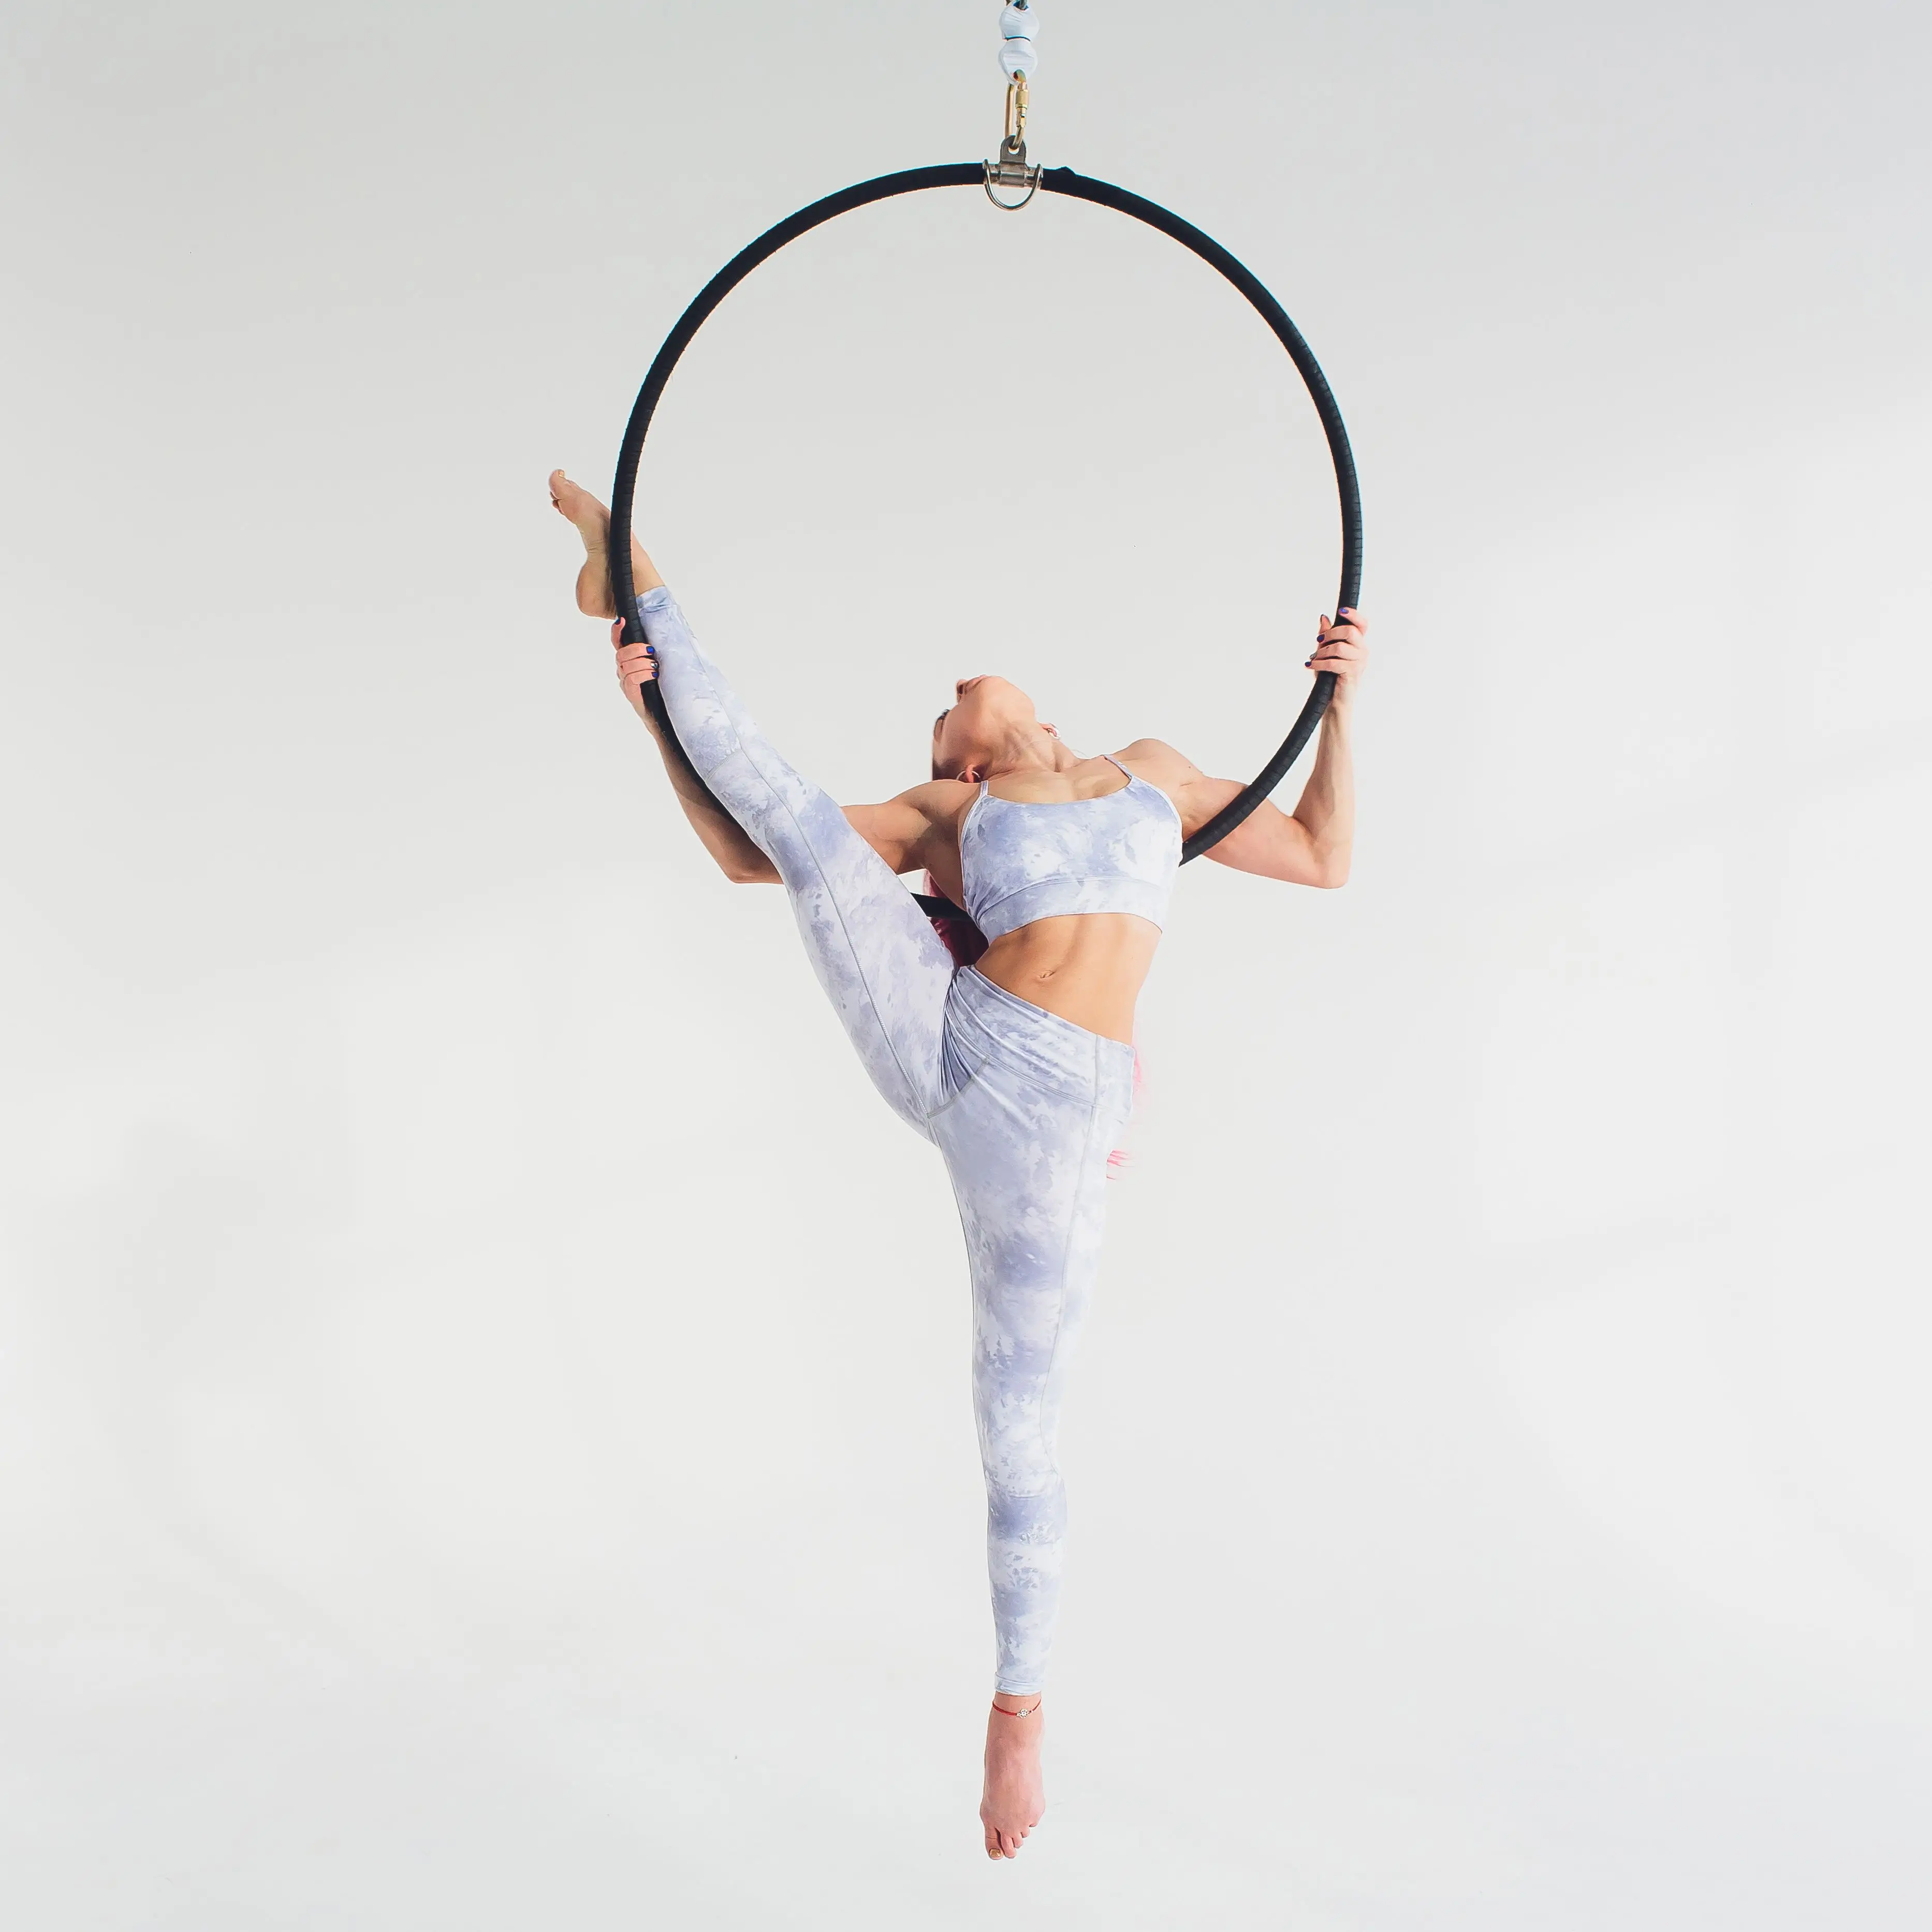 

PRIOR FITNESS Silver Rings Fitness Aerial hoop yoga exercises Aerial Lyra Hoops Indoor Outdoor Equipment include accessories